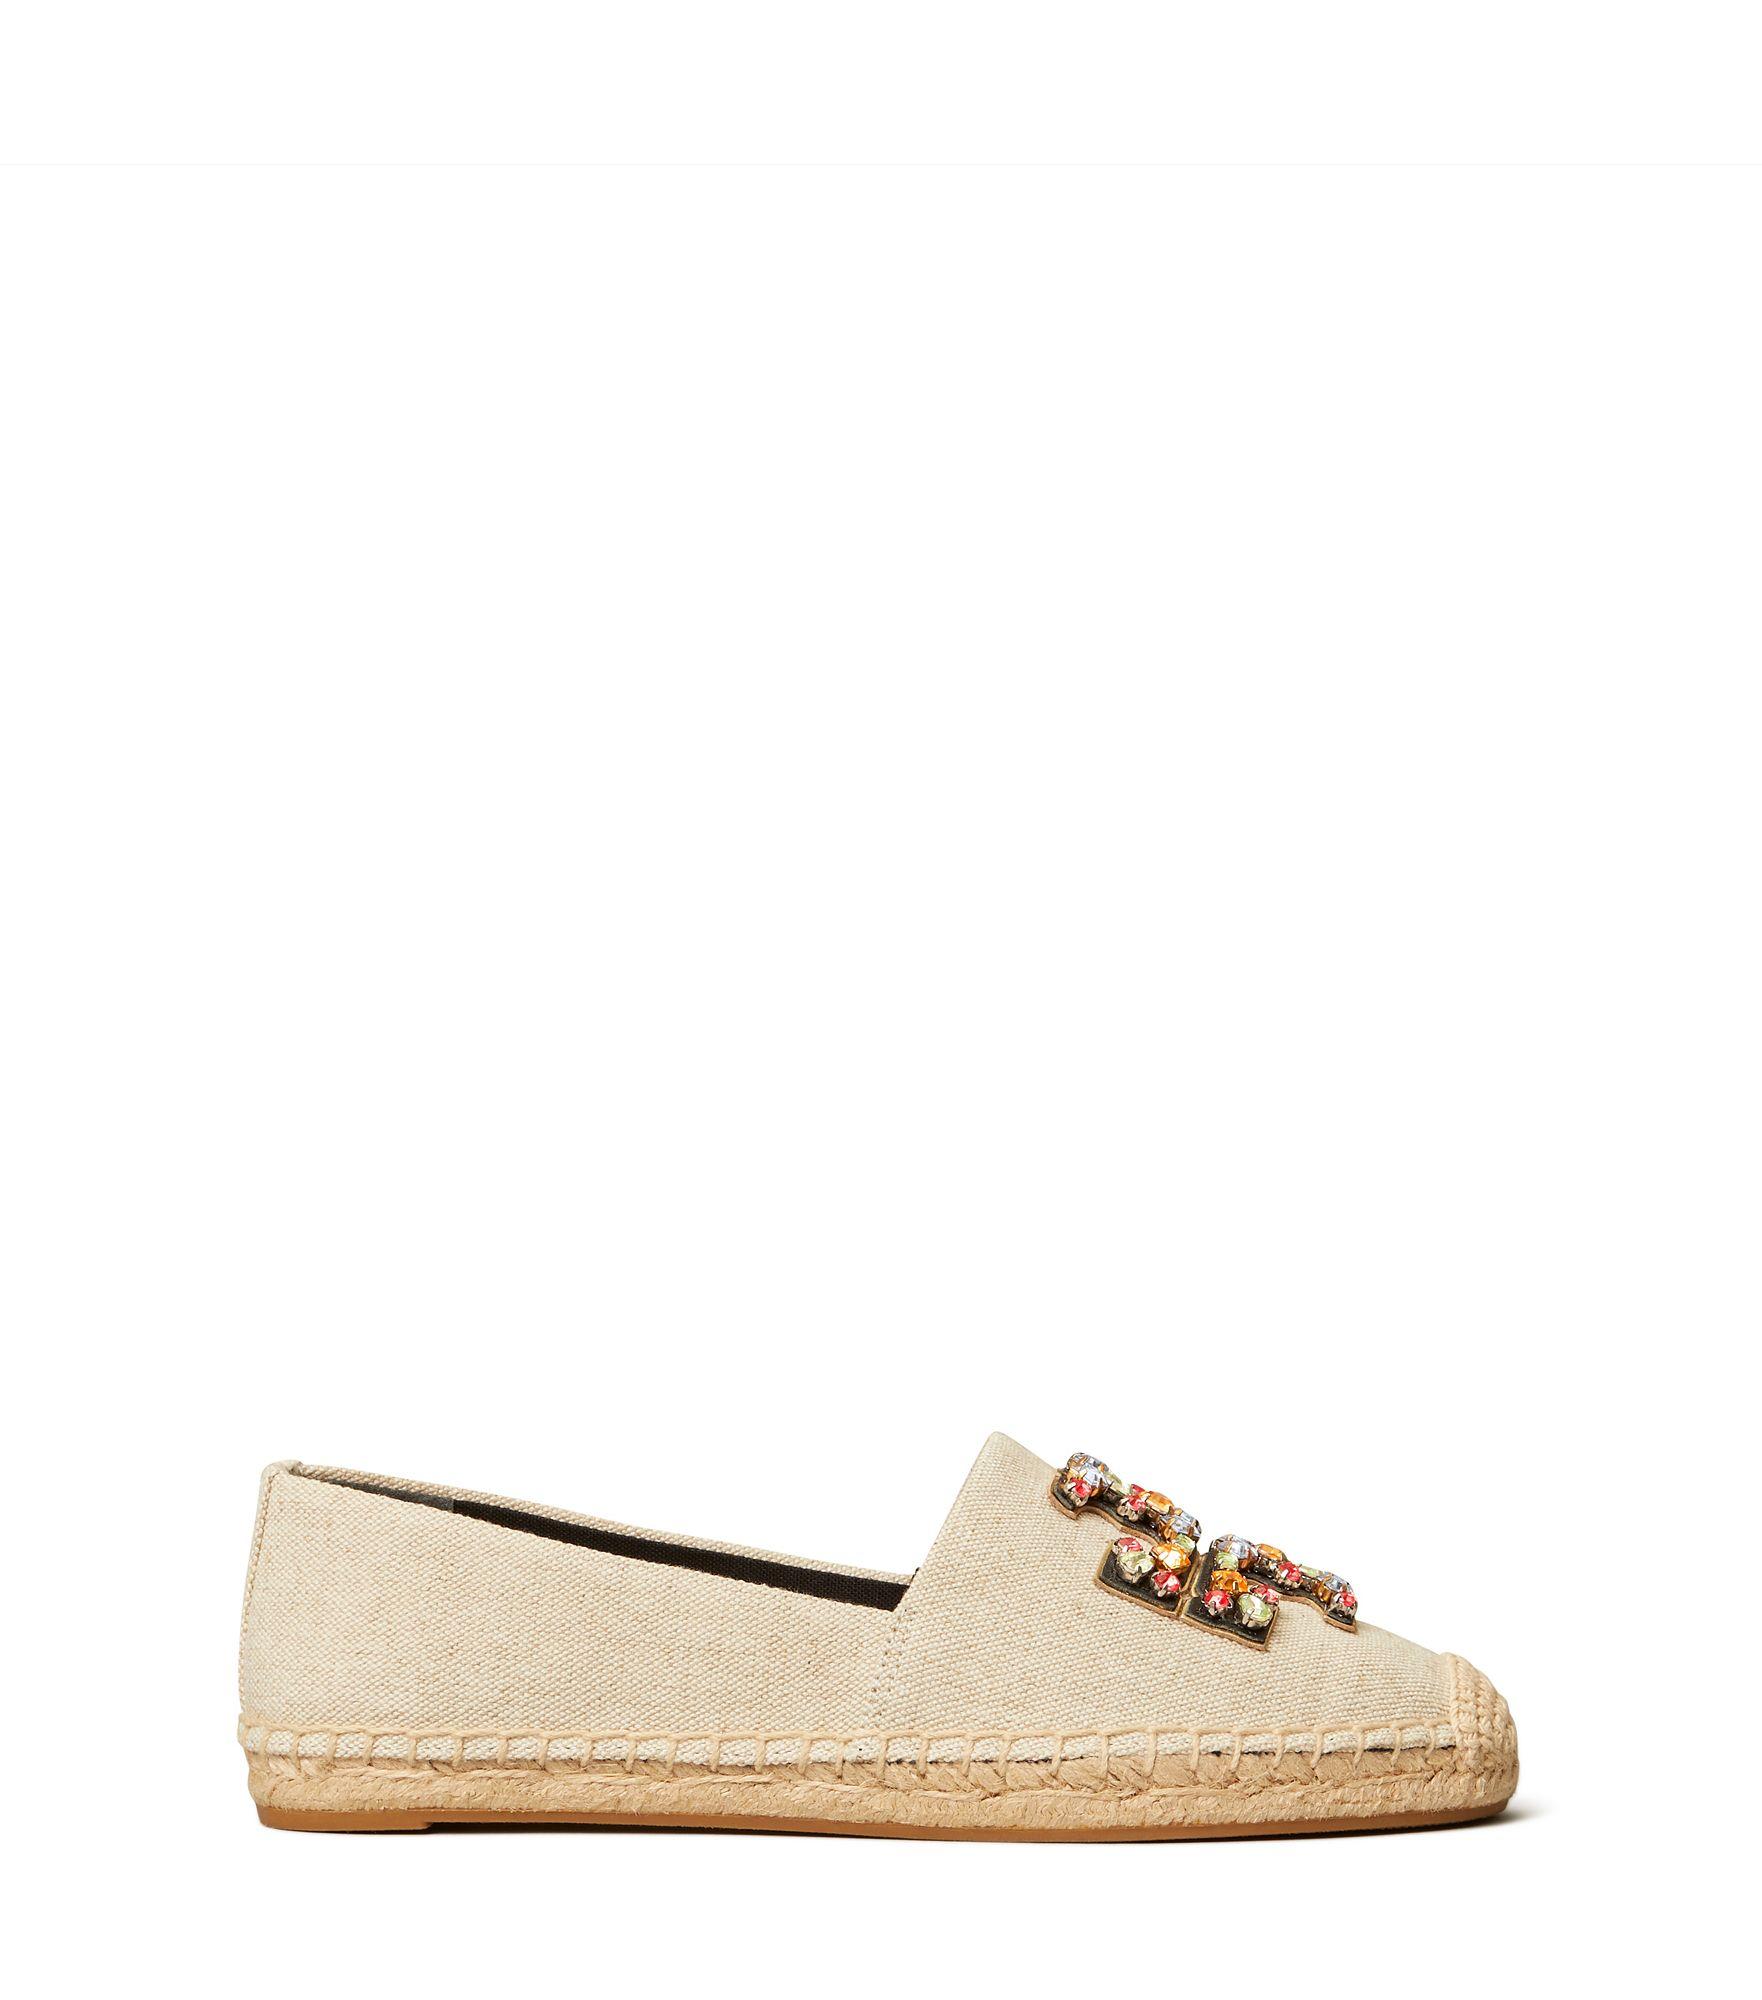 Tory Burch Ines Embellished Leather & Linen Espadrilles in Natural | Lyst